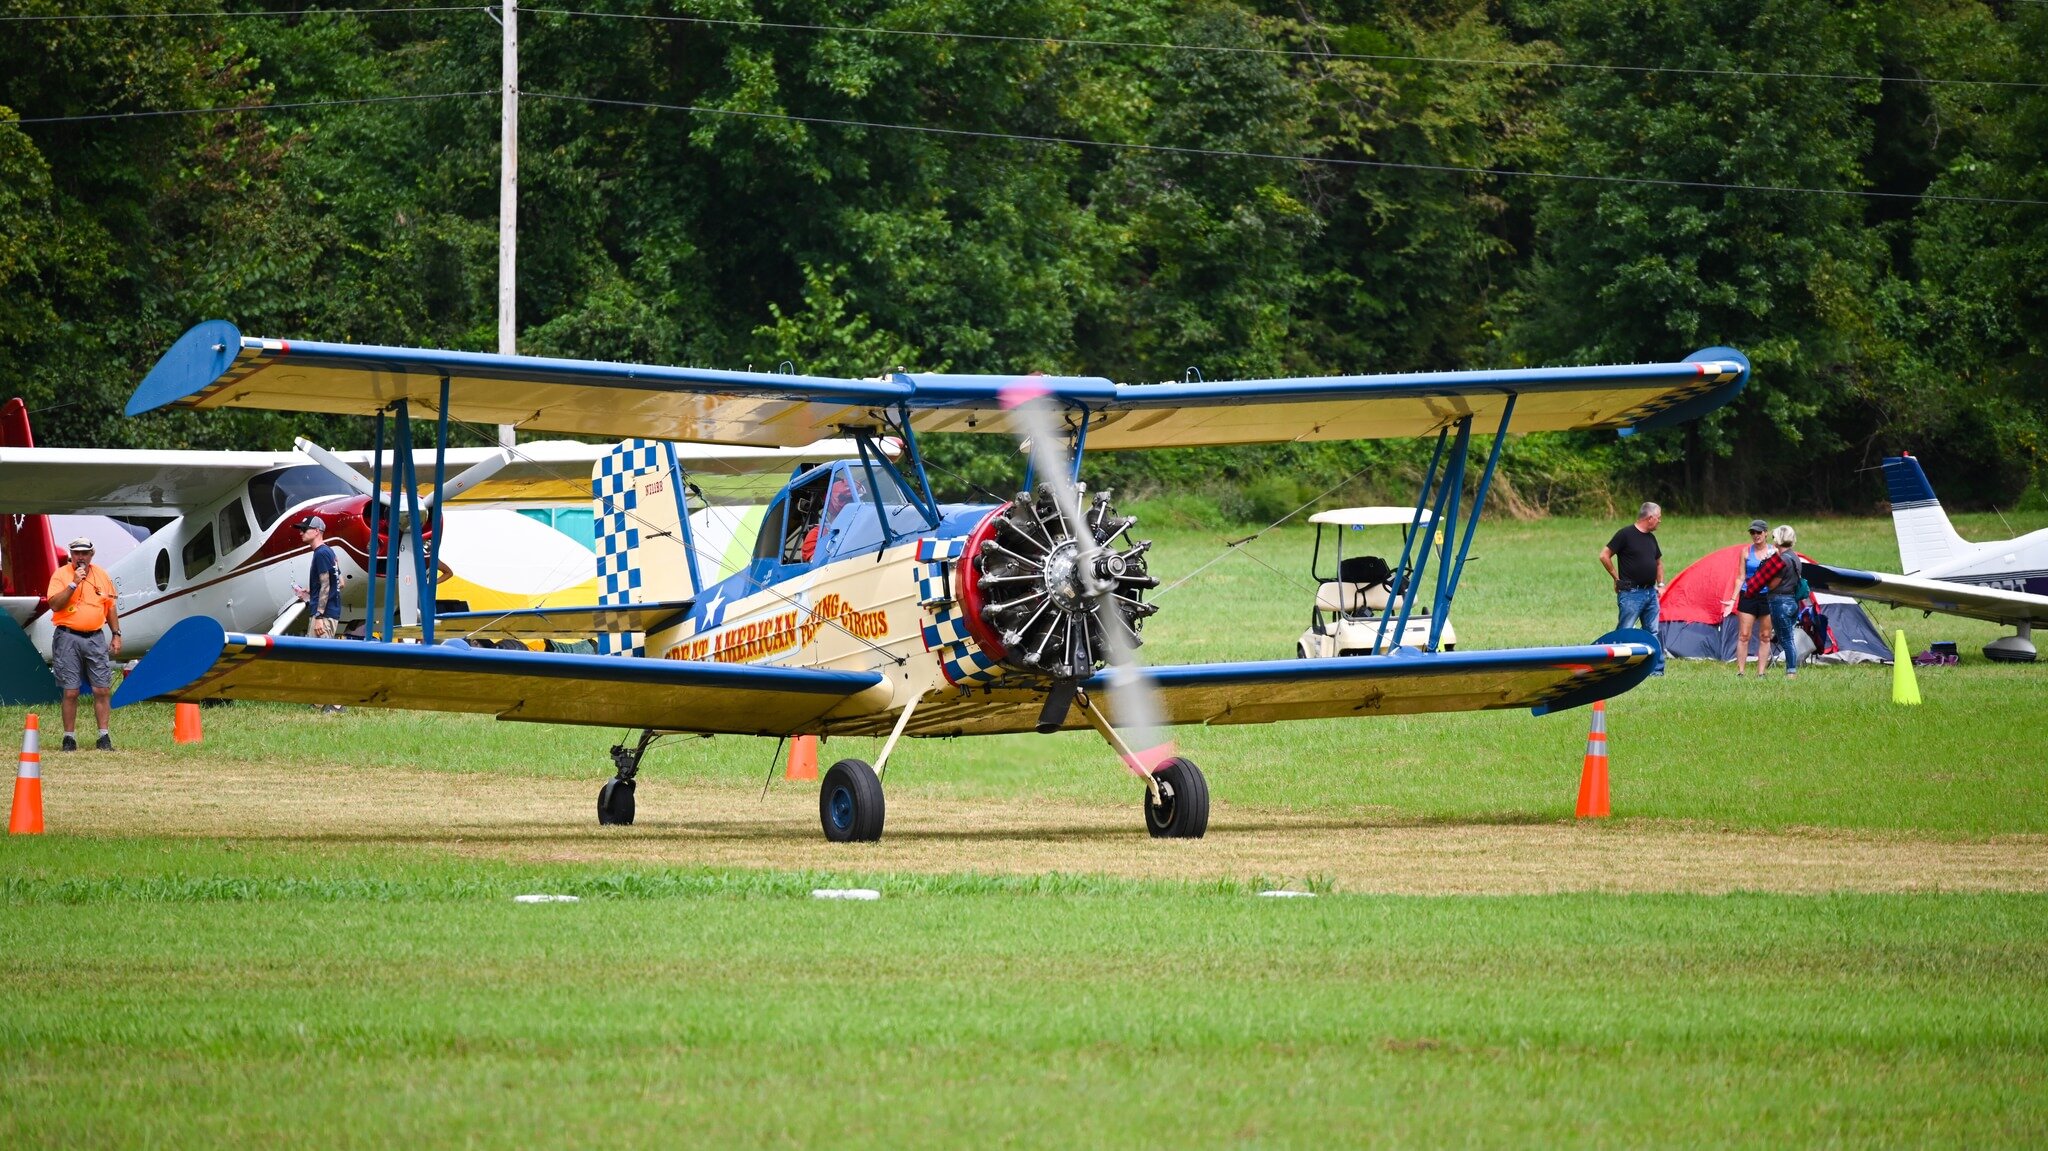 One of the fun planes that fly for Arkanstol. Come see who shows up for the 3 runway timed STOL event this year. September 27 - October 1st at Byrd's Adventure Center (51AR). 

 #aviationdaily #aviation4u #aviation #pilots #taildragger #airplanelover